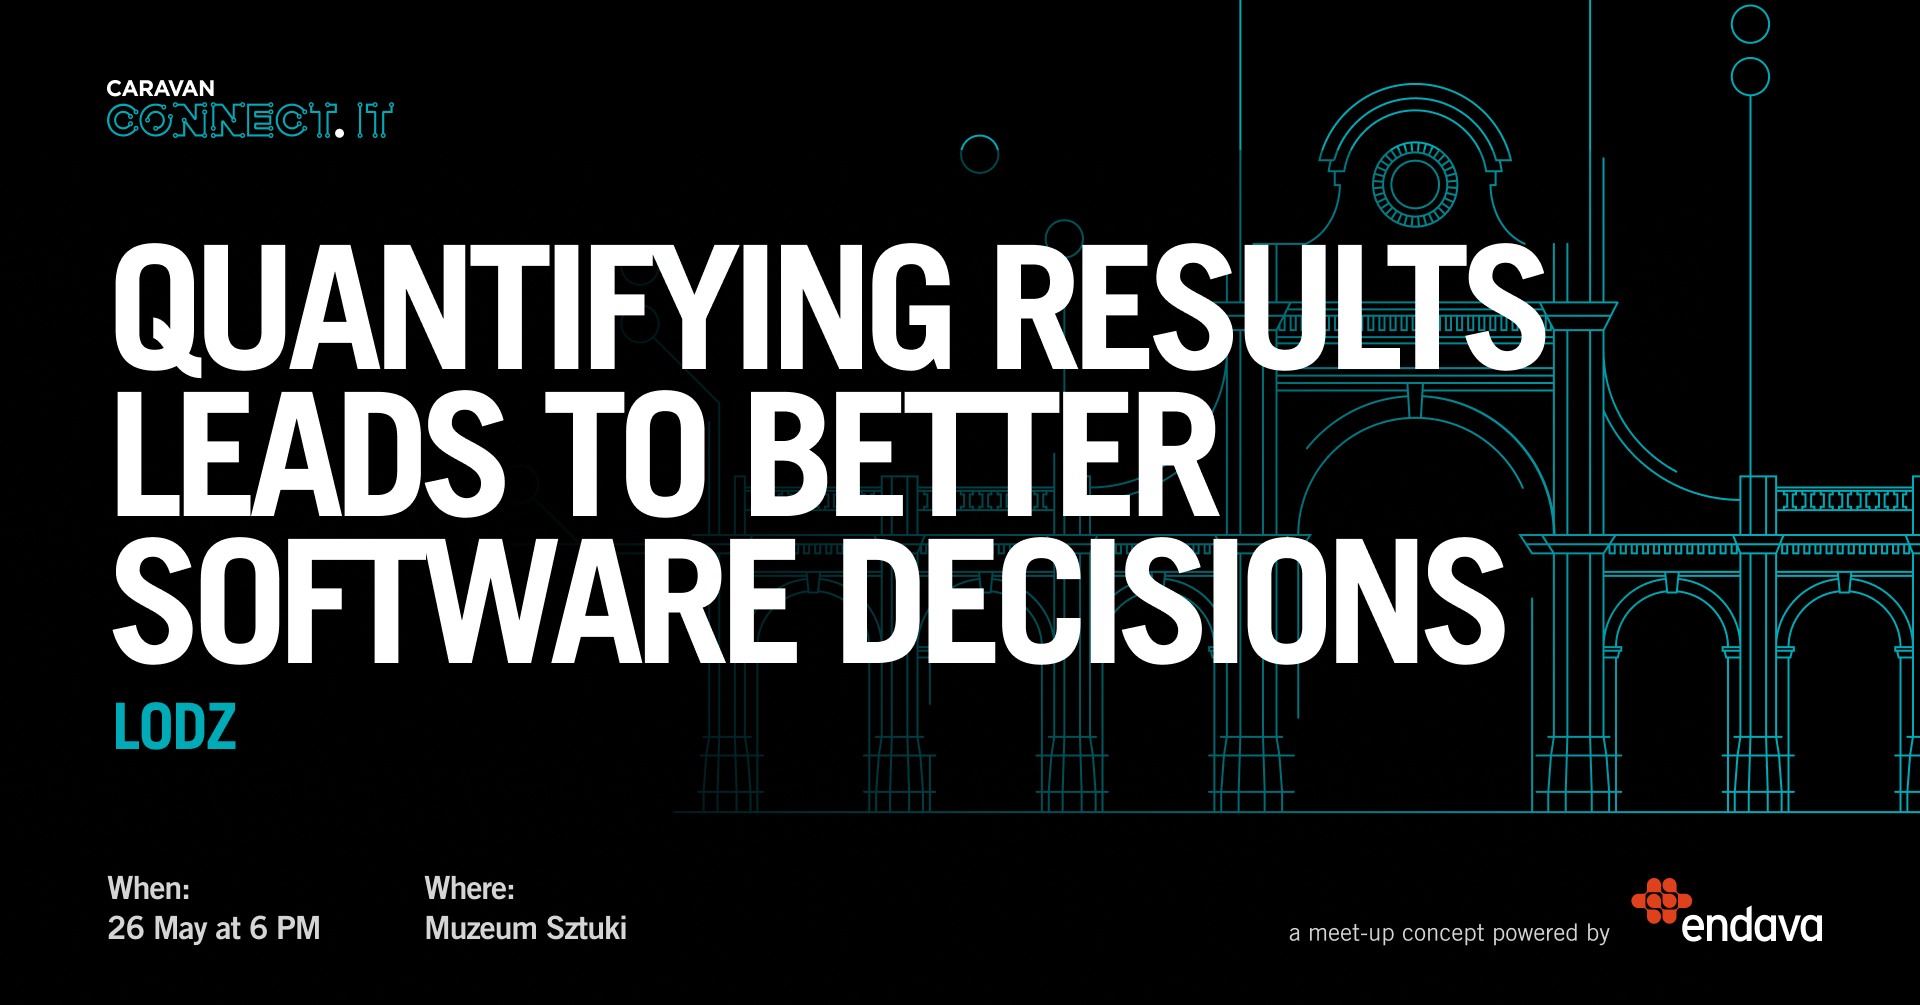 connect-it-lodz-quantifying-results-leads-to-better-software-decisions-maj-2022